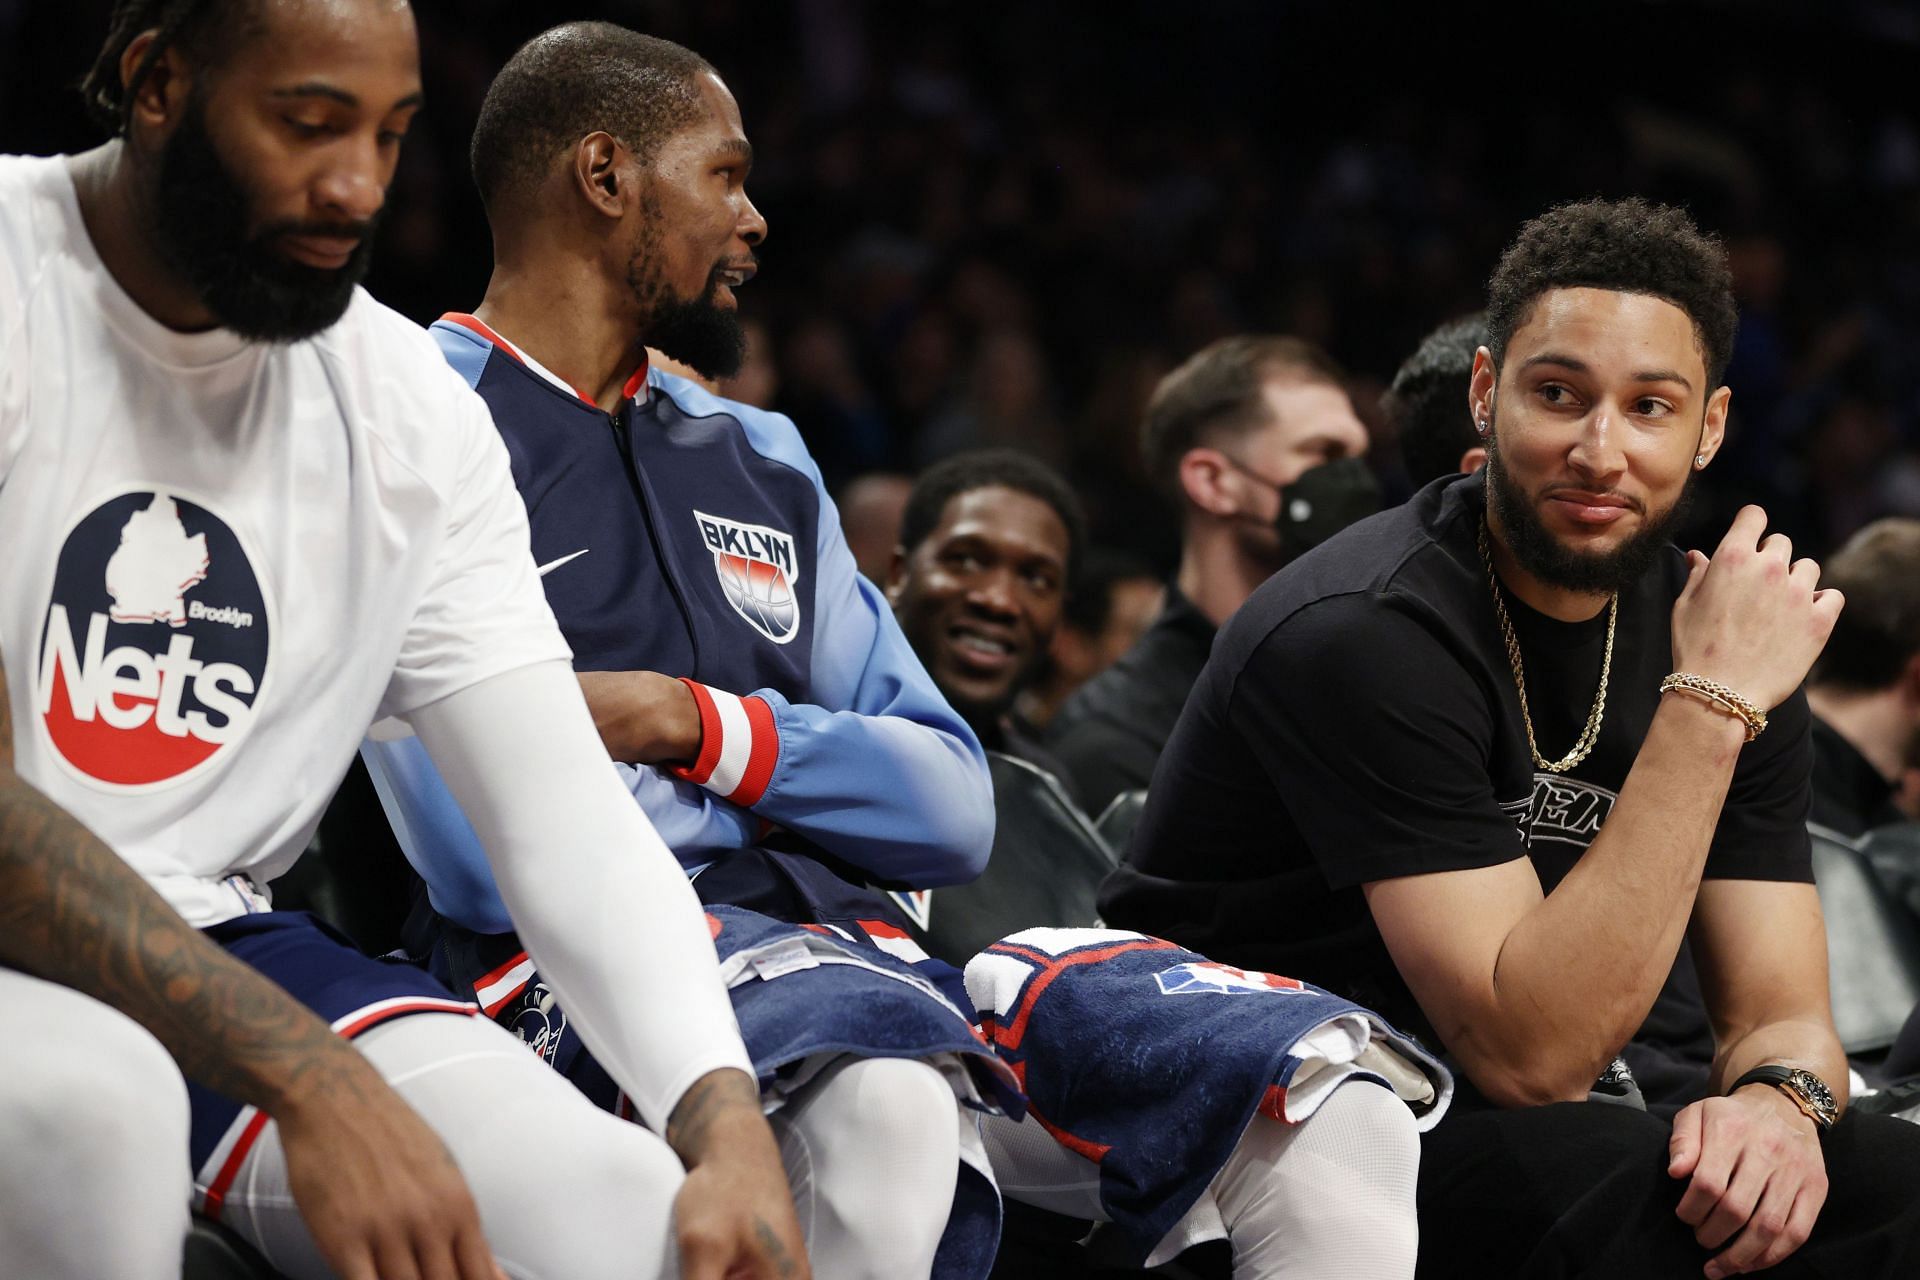 Brooklyn Nets guard Ben Simmons has yet to return to the court